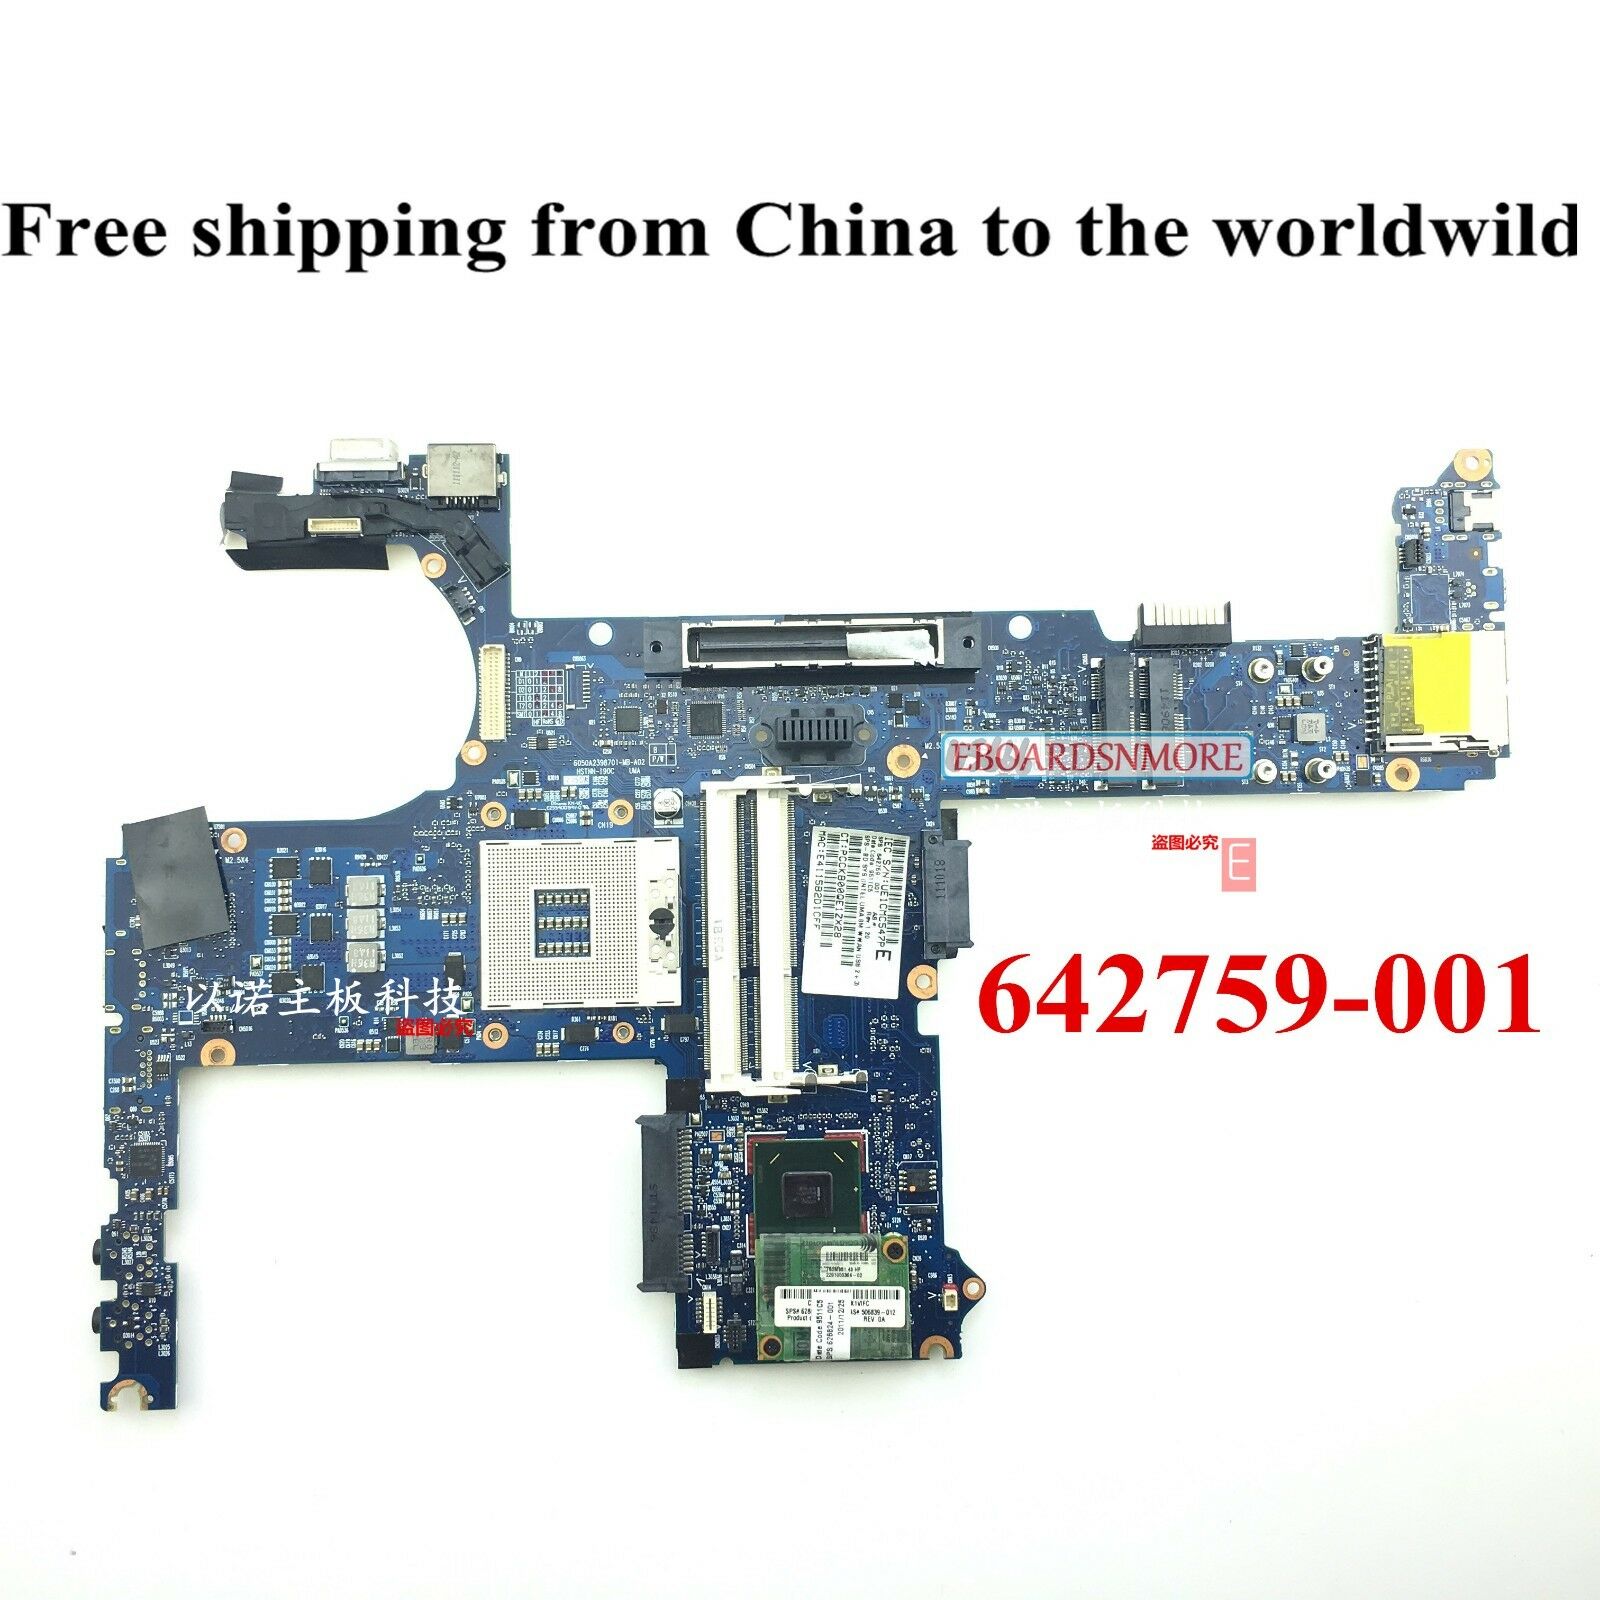 642759-001 Intel QM67 Motherboard for HP EliteBook 8460P Notebook Laptop, A Compatible CPU Brand: Intel Fea